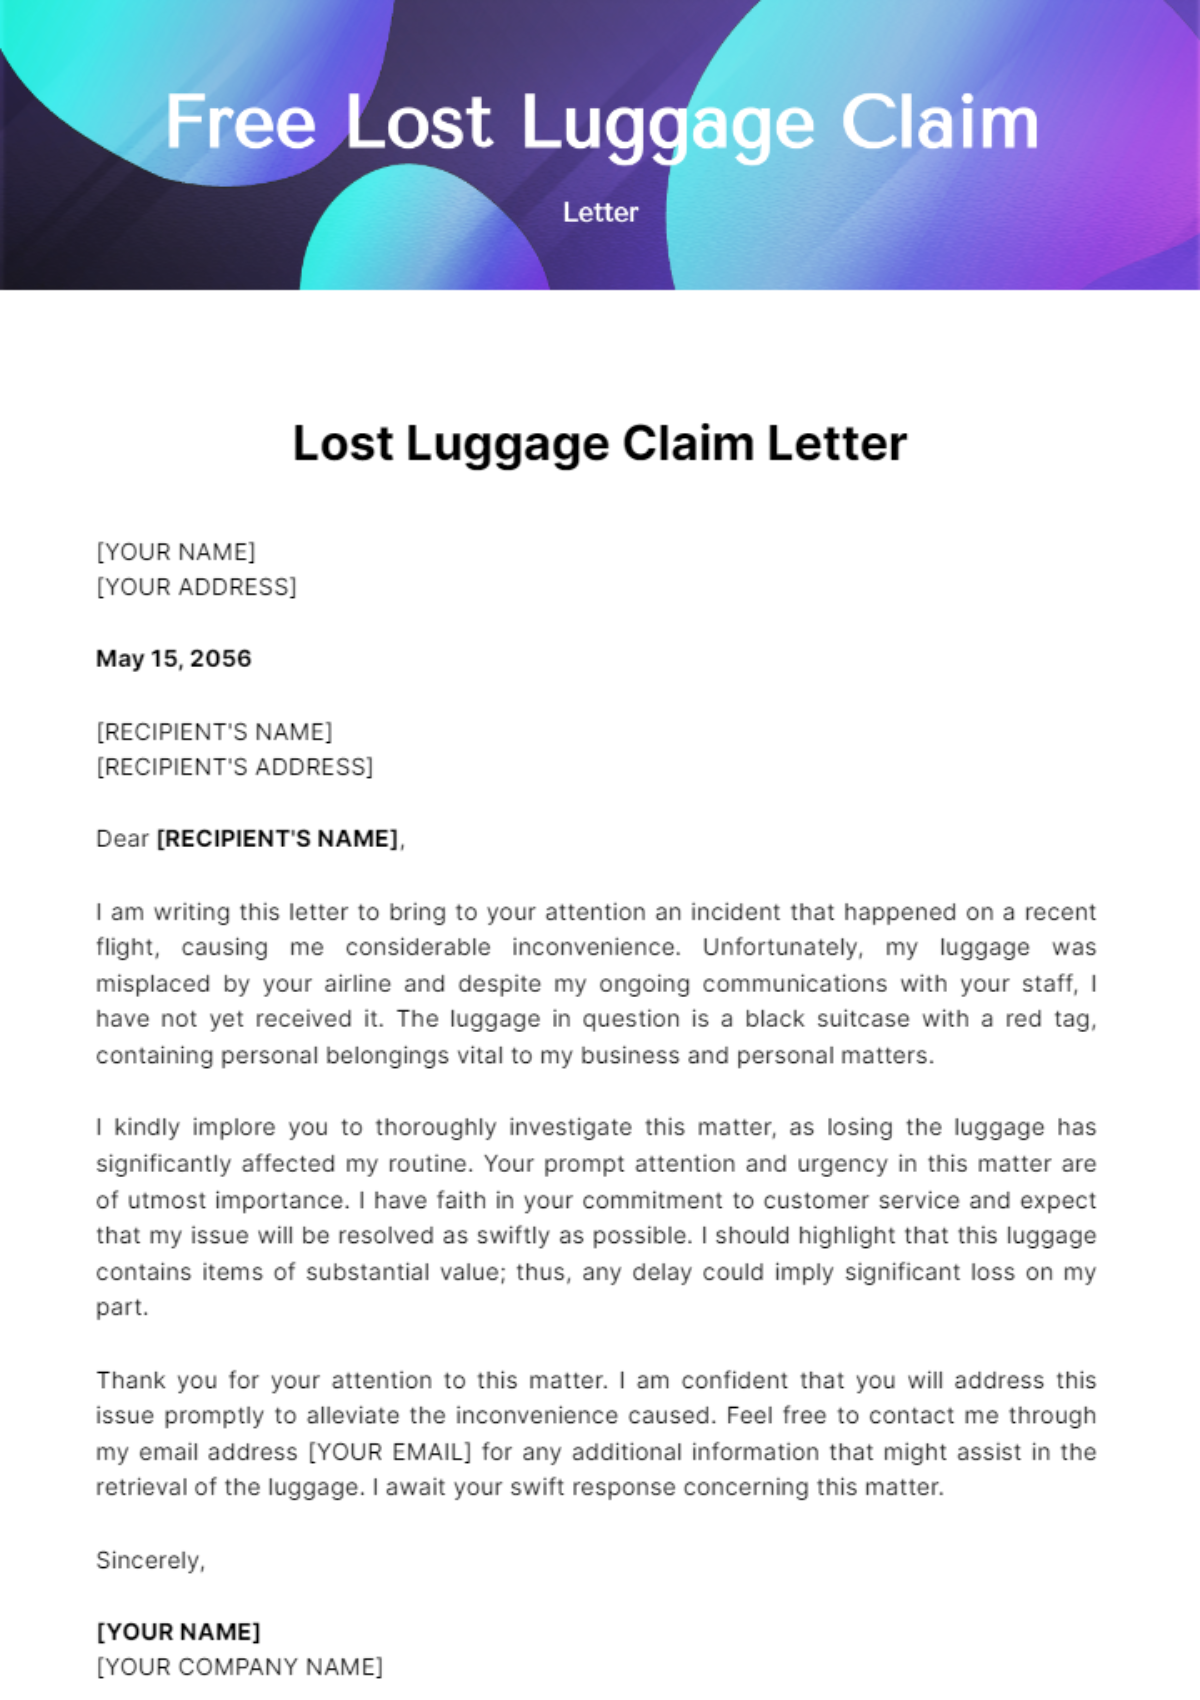 Free Lost Luggage Claim Letter Template